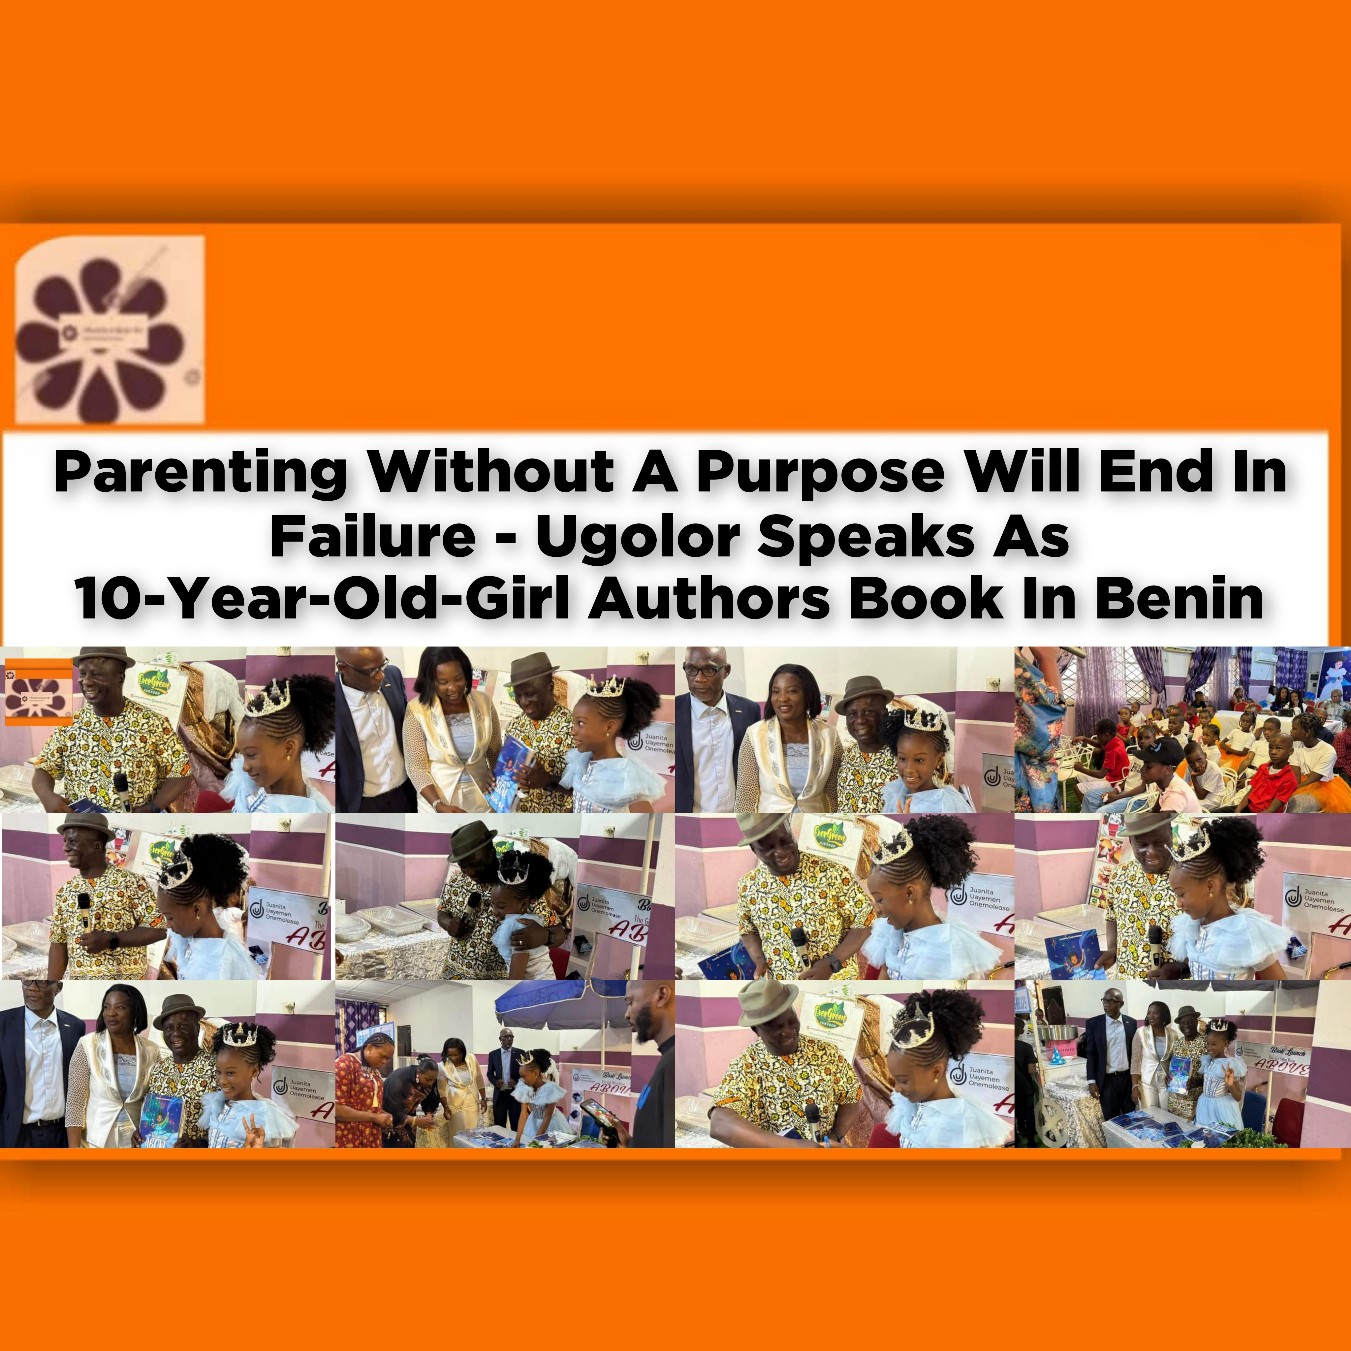 Parenting Without A Purpose Will End In Failure - Ugolor Speaks As 10-Year-Old-Girl Authors Book In Benin ~ OsazuwaAkonedo #NsimaEkere